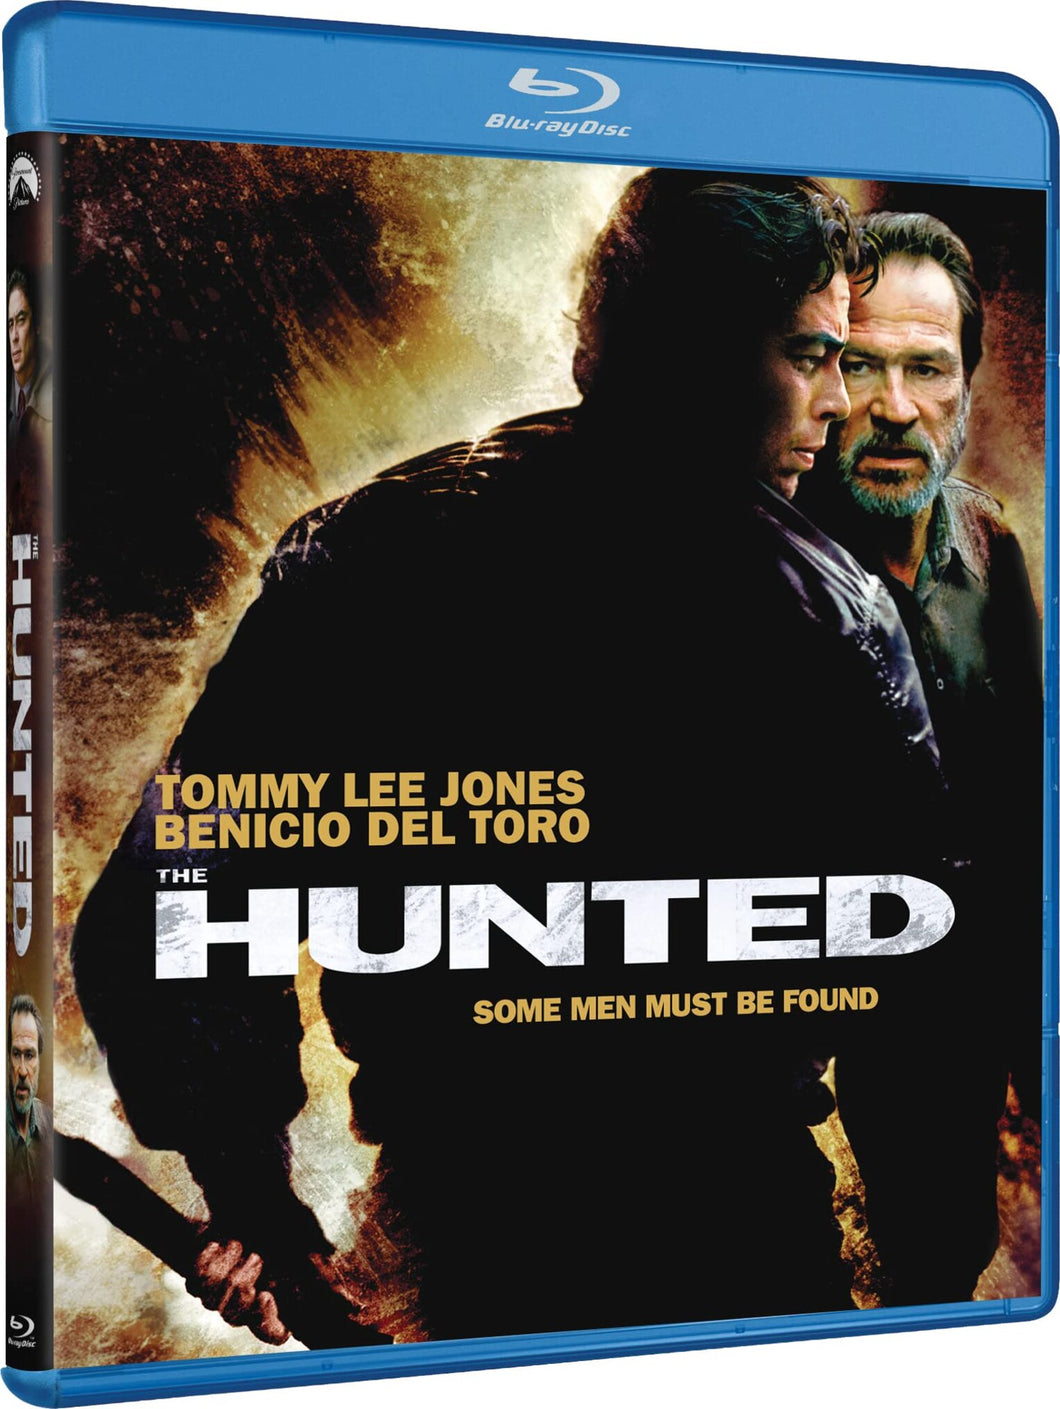 The Hunted (2003) des William Friedkin - front cover